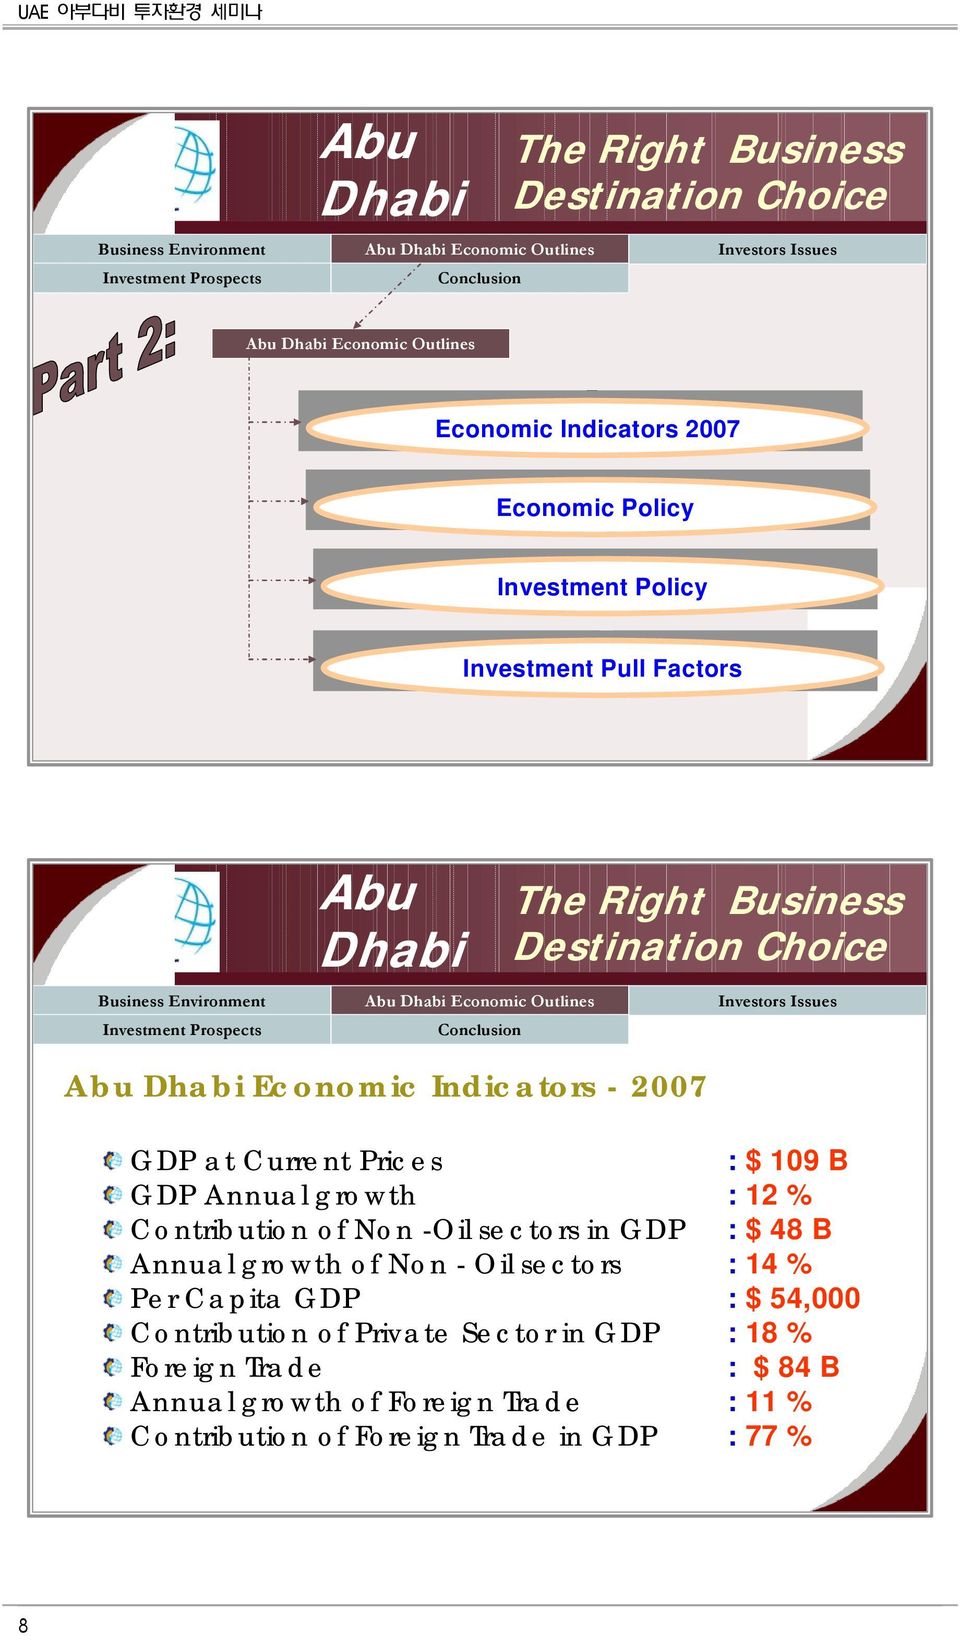 Destination Choice Business Environment Abu Dhabi Economic Outlines Investors Issues Investment Prospects Conclusion Abu Dhabi Economic Indicators - 2007 GDP at Current Prices : $ 109 B GDP Annual